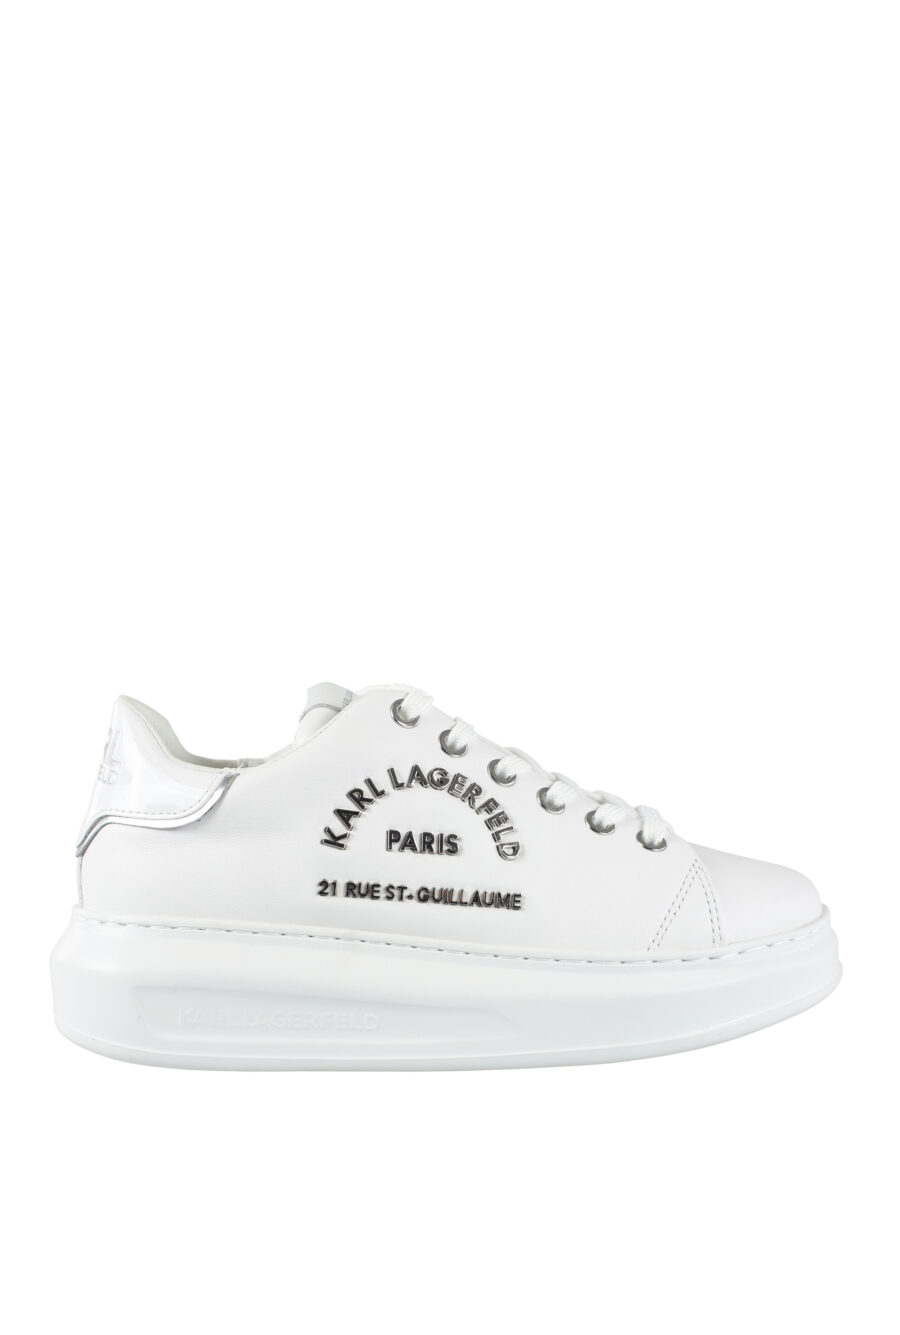 White trainers with logo lettering "rue st guillaume" silver - IMG 9566 1